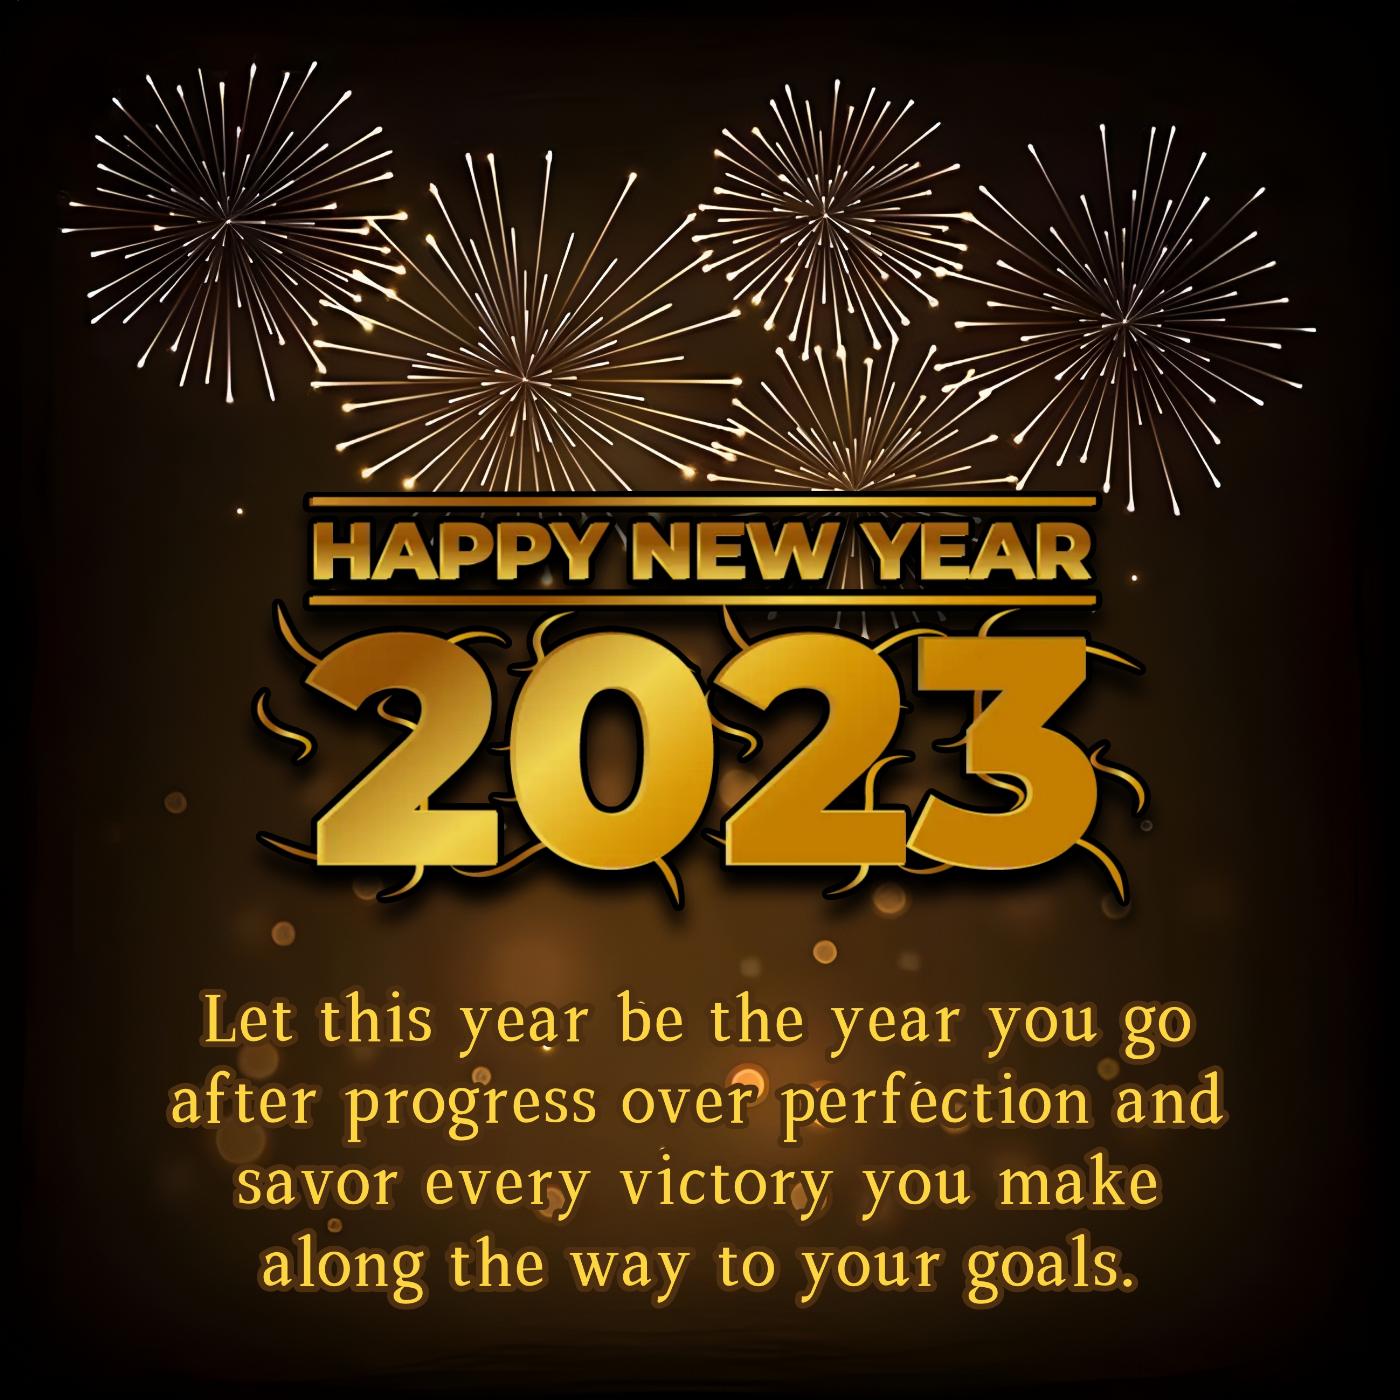 Let this year be the year you go after progress over perfection